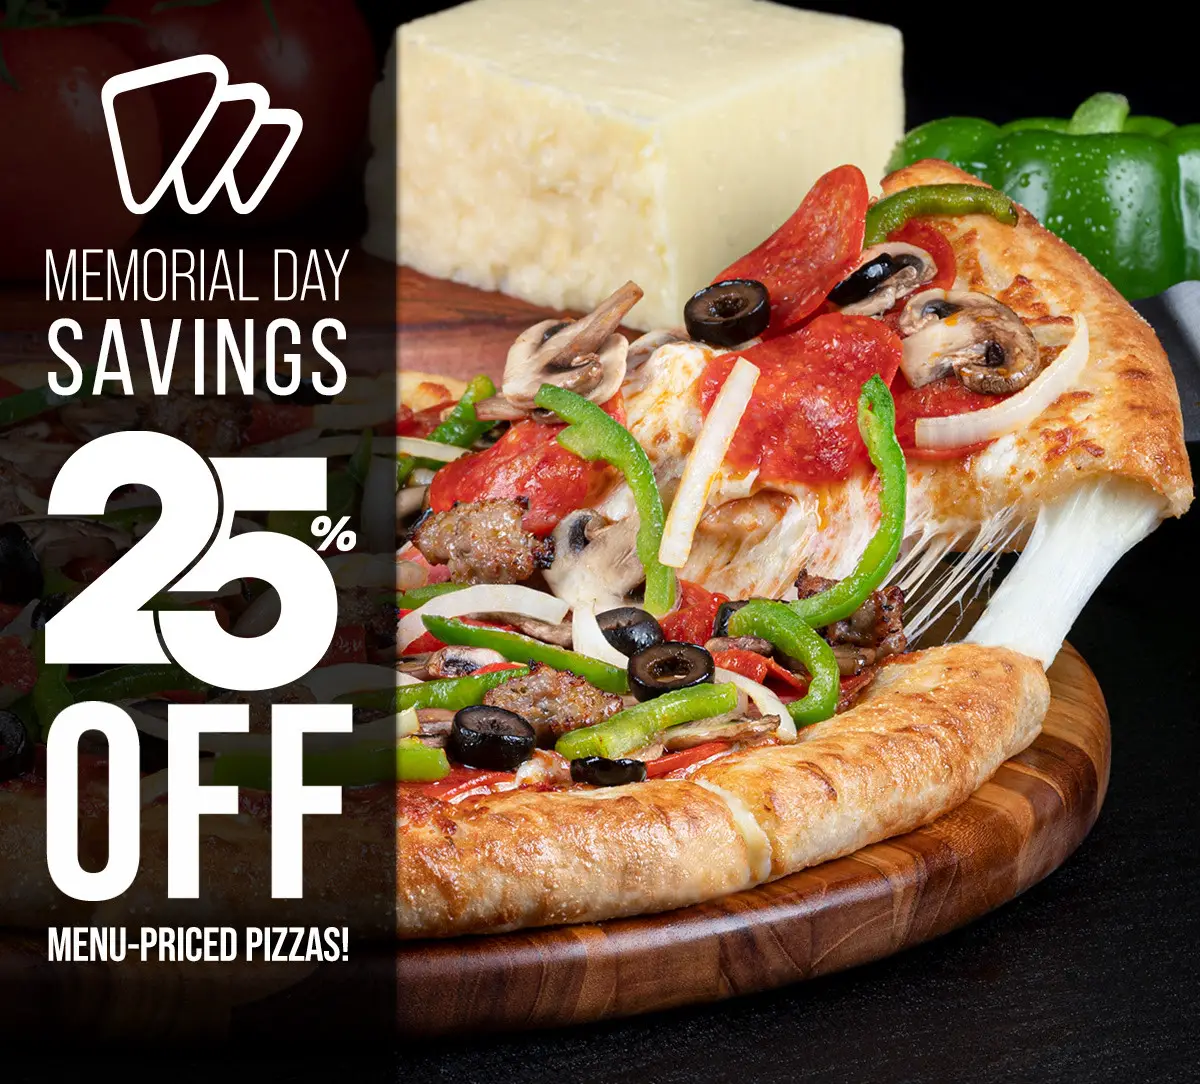 Pizza Guys Memorial Day [Happy Memorial Day] Enjoy 25% Off All Menu-Priced Pizzas